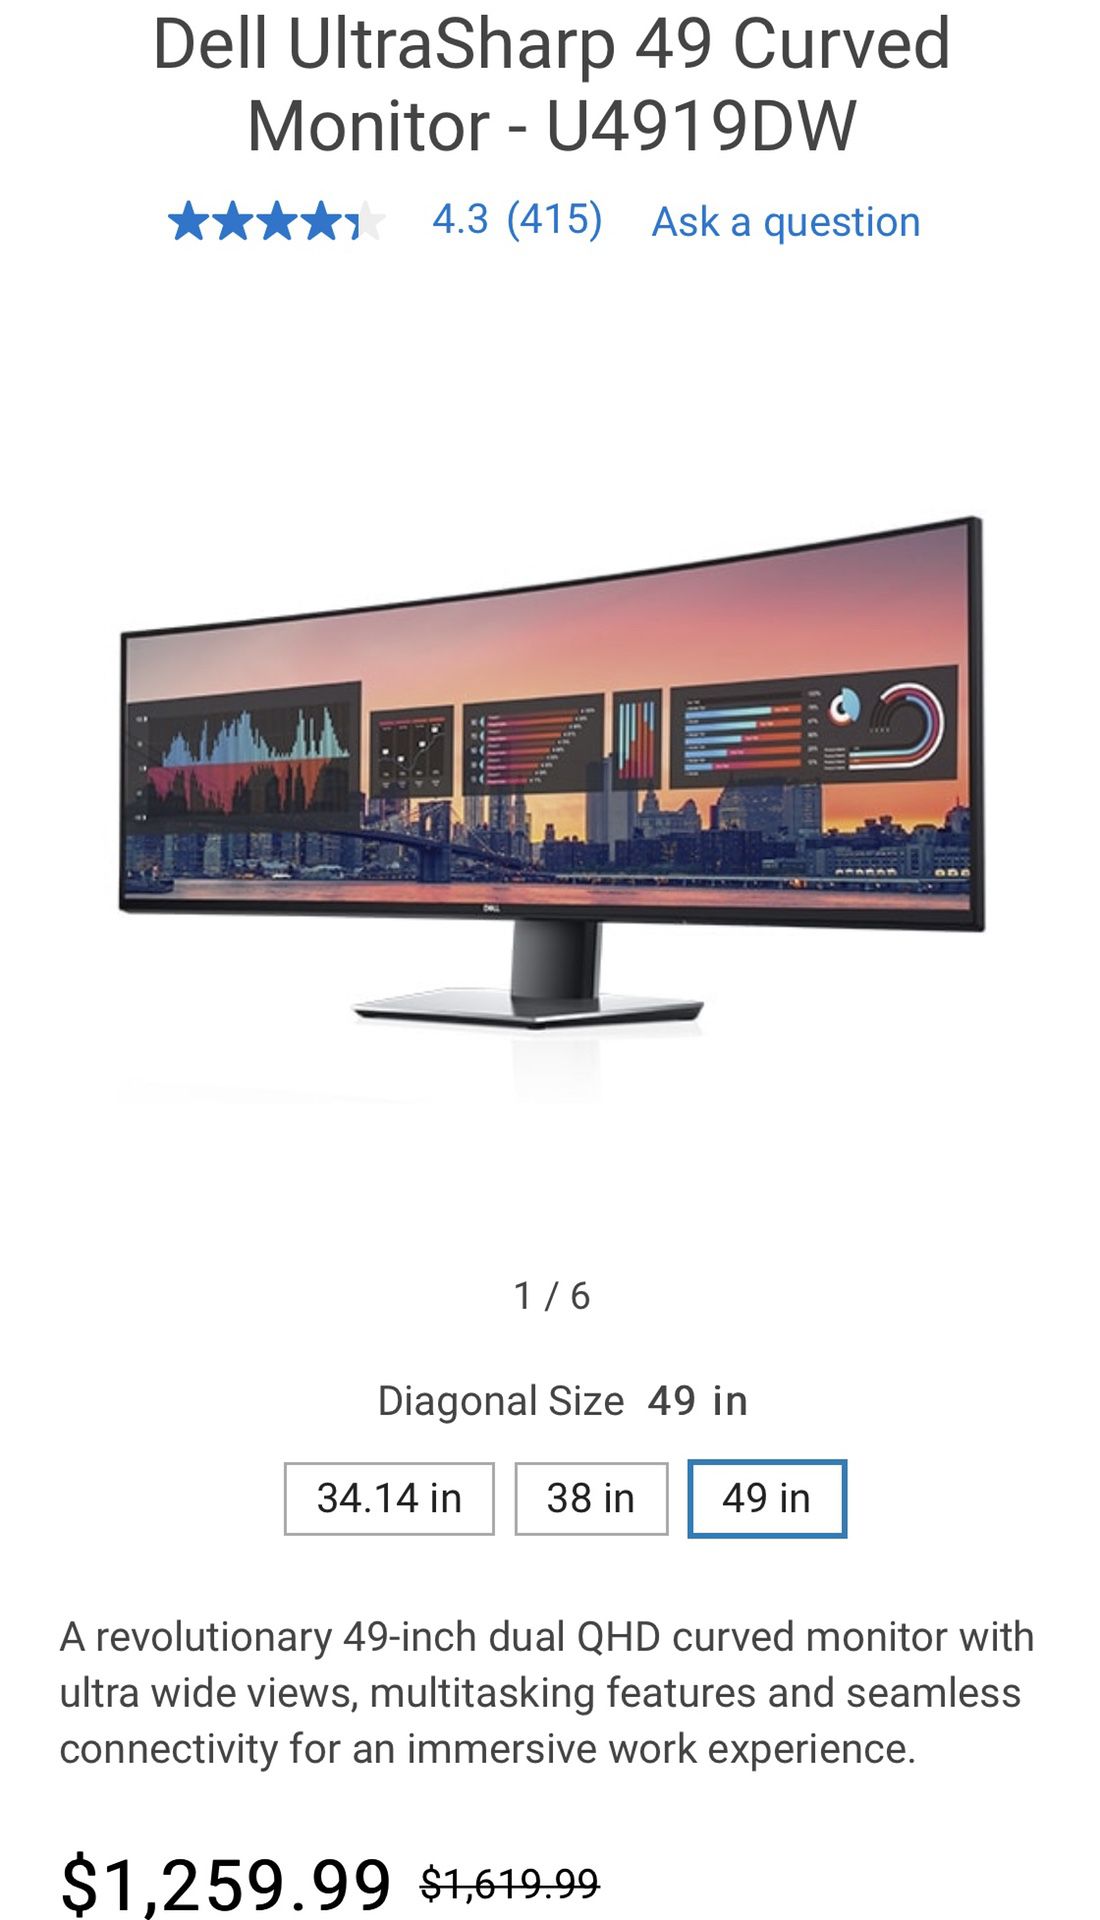 DELL 49” CURVED MONITOR